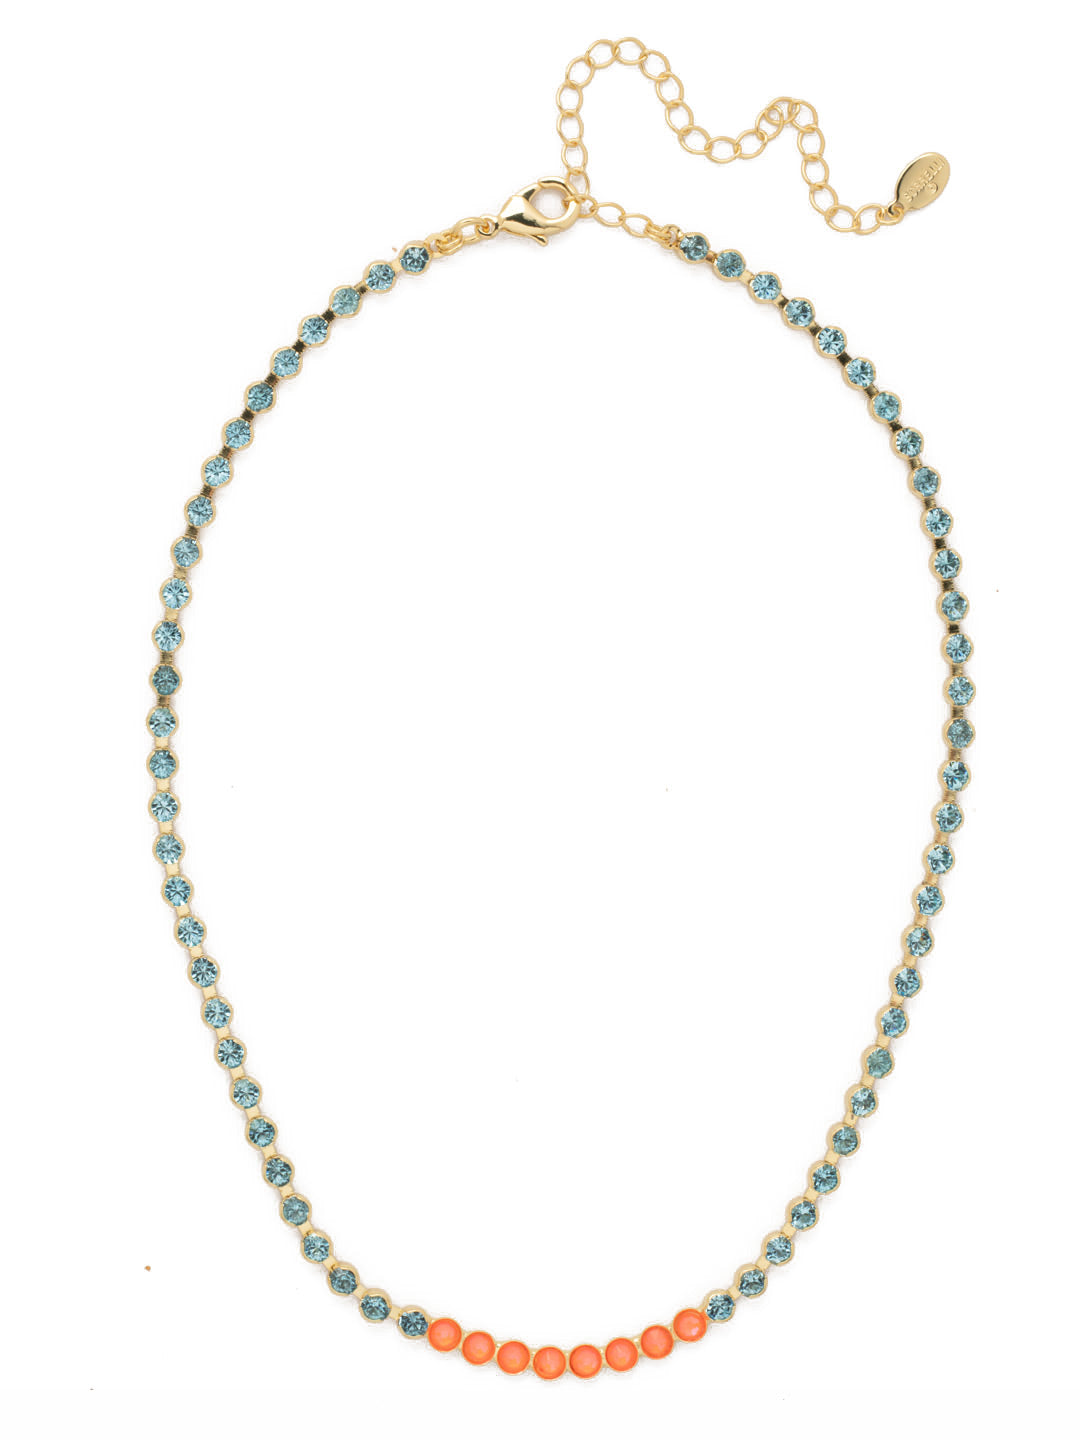 Marnie Tennis Necklace - NFA2BGPRT - <p>Perfect for dressing up or down, the classic Marnie Tennis Necklace features a repeating line of crystals secured by a lobster claw clasp. From Sorrelli's Portofino collection in our Bright Gold-tone finish.</p>